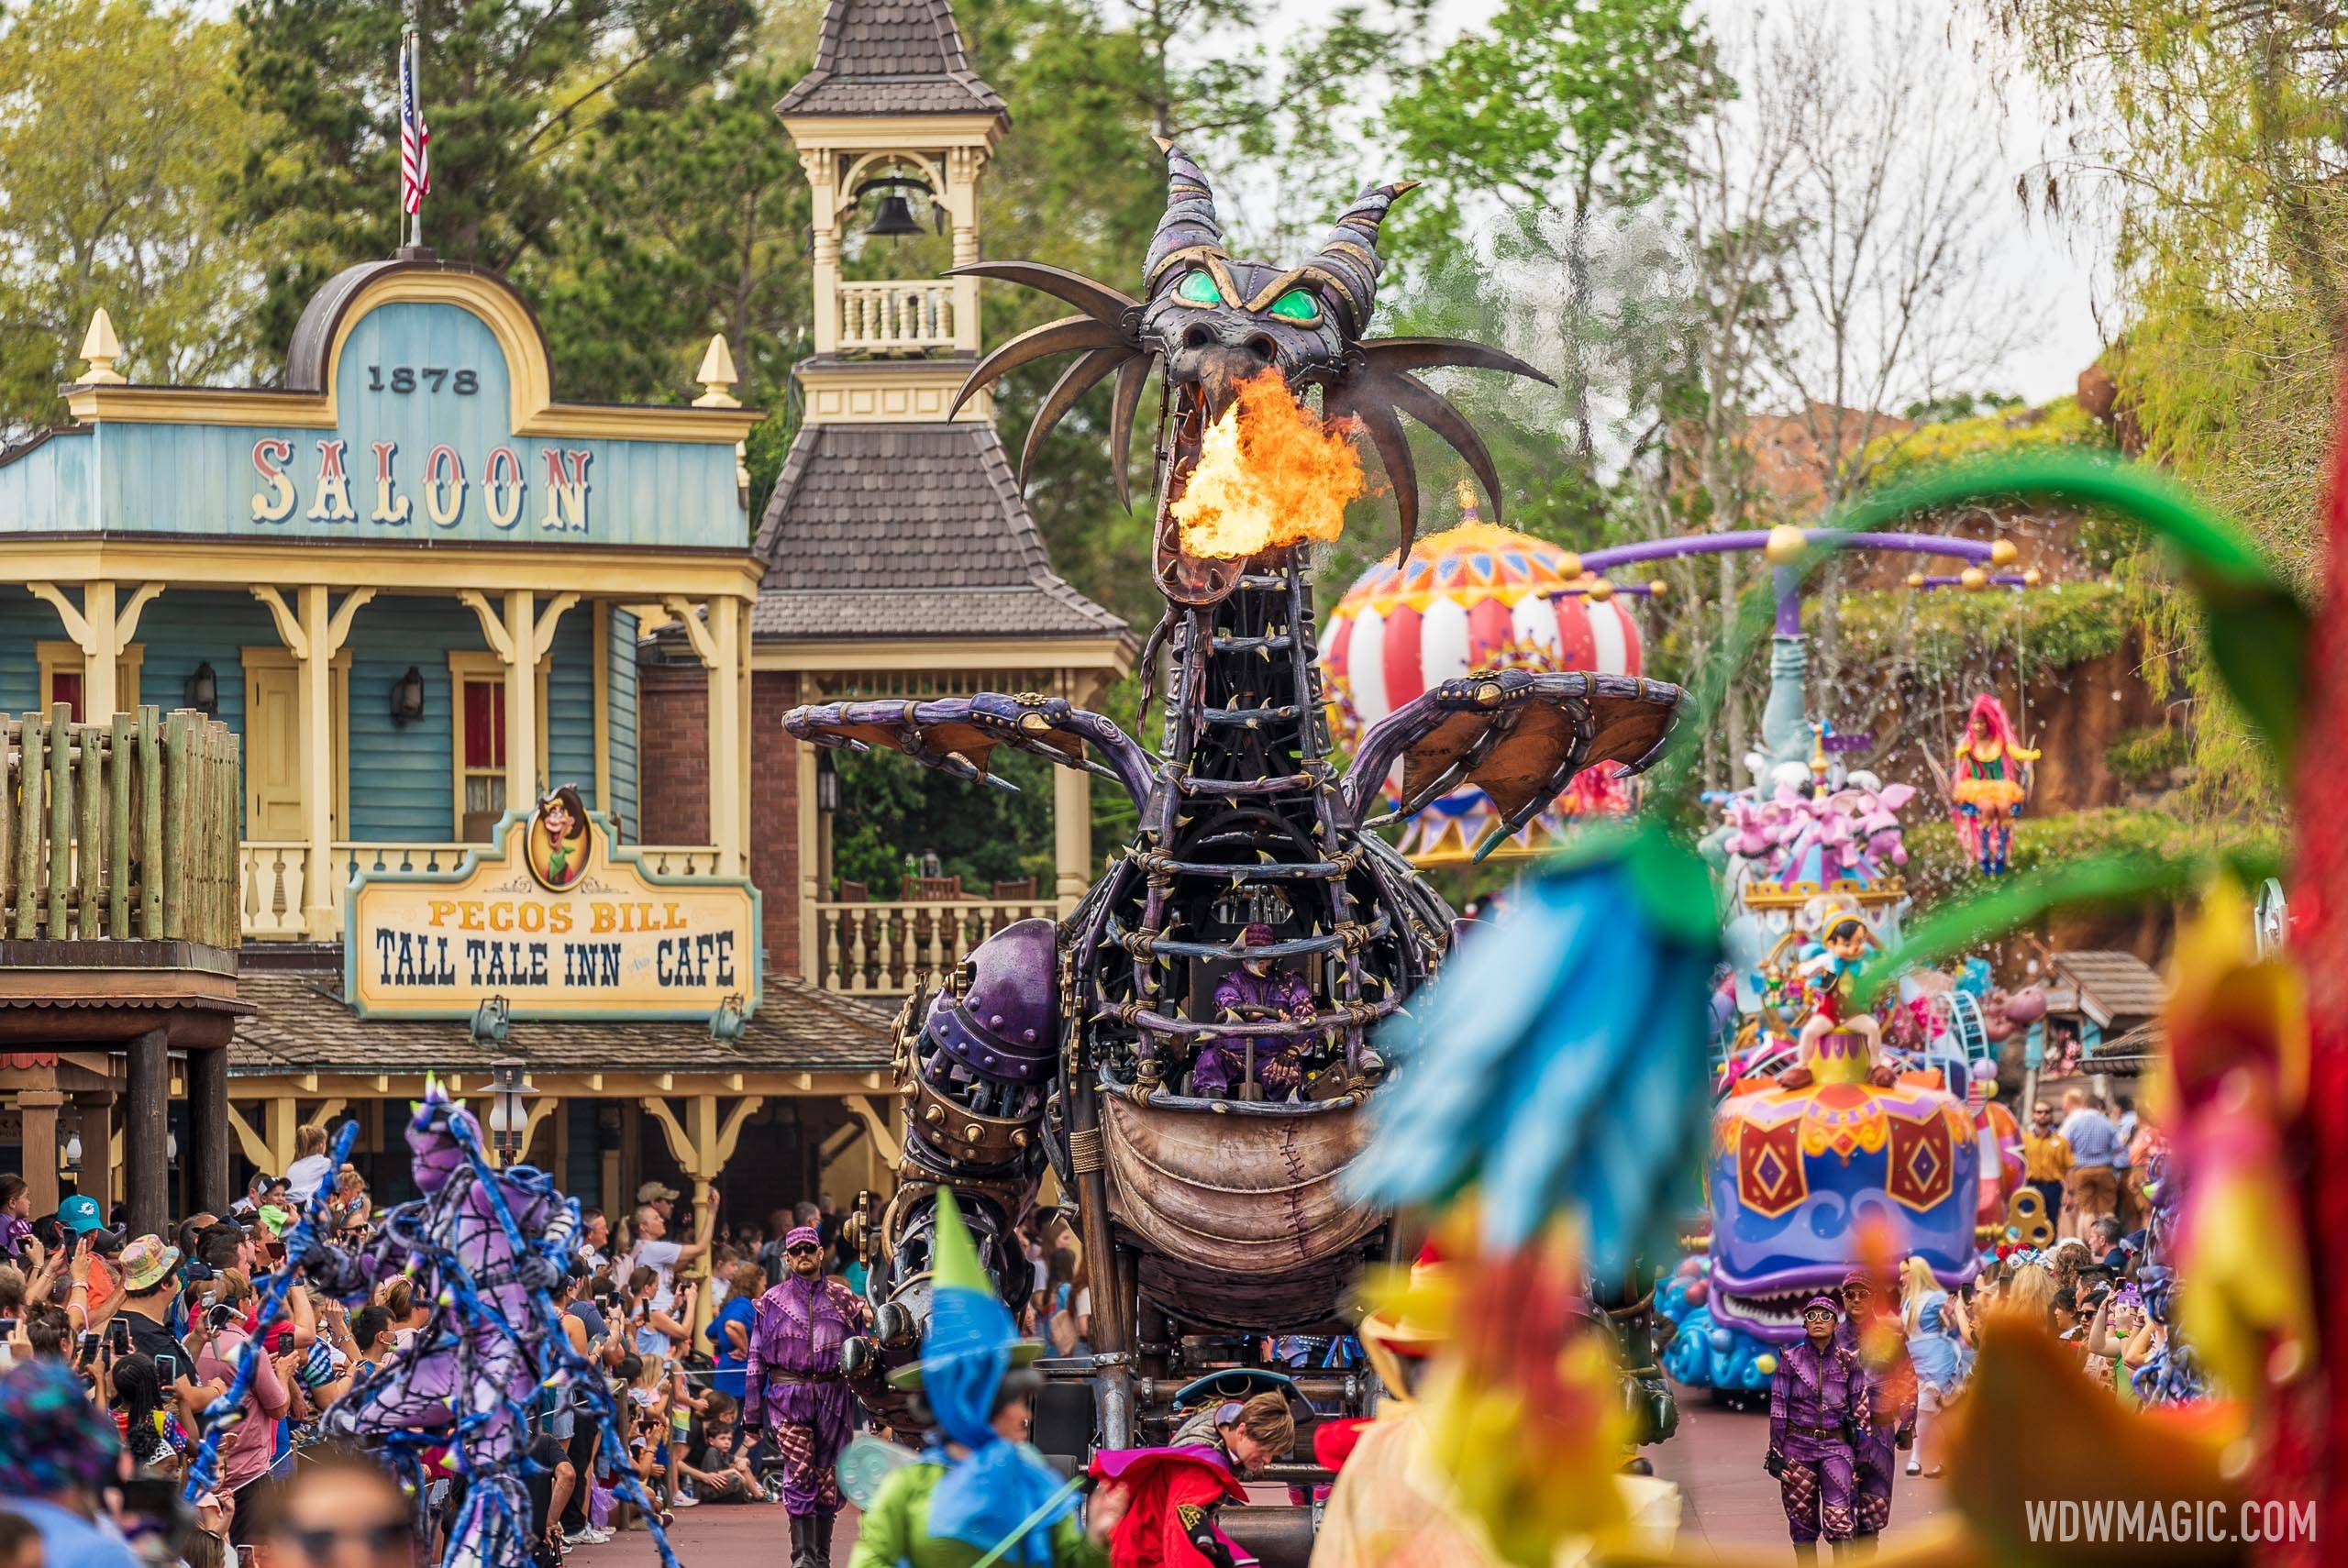 Disney Festival of Fantasy Parade preferred viewing will soon be available via Genie+